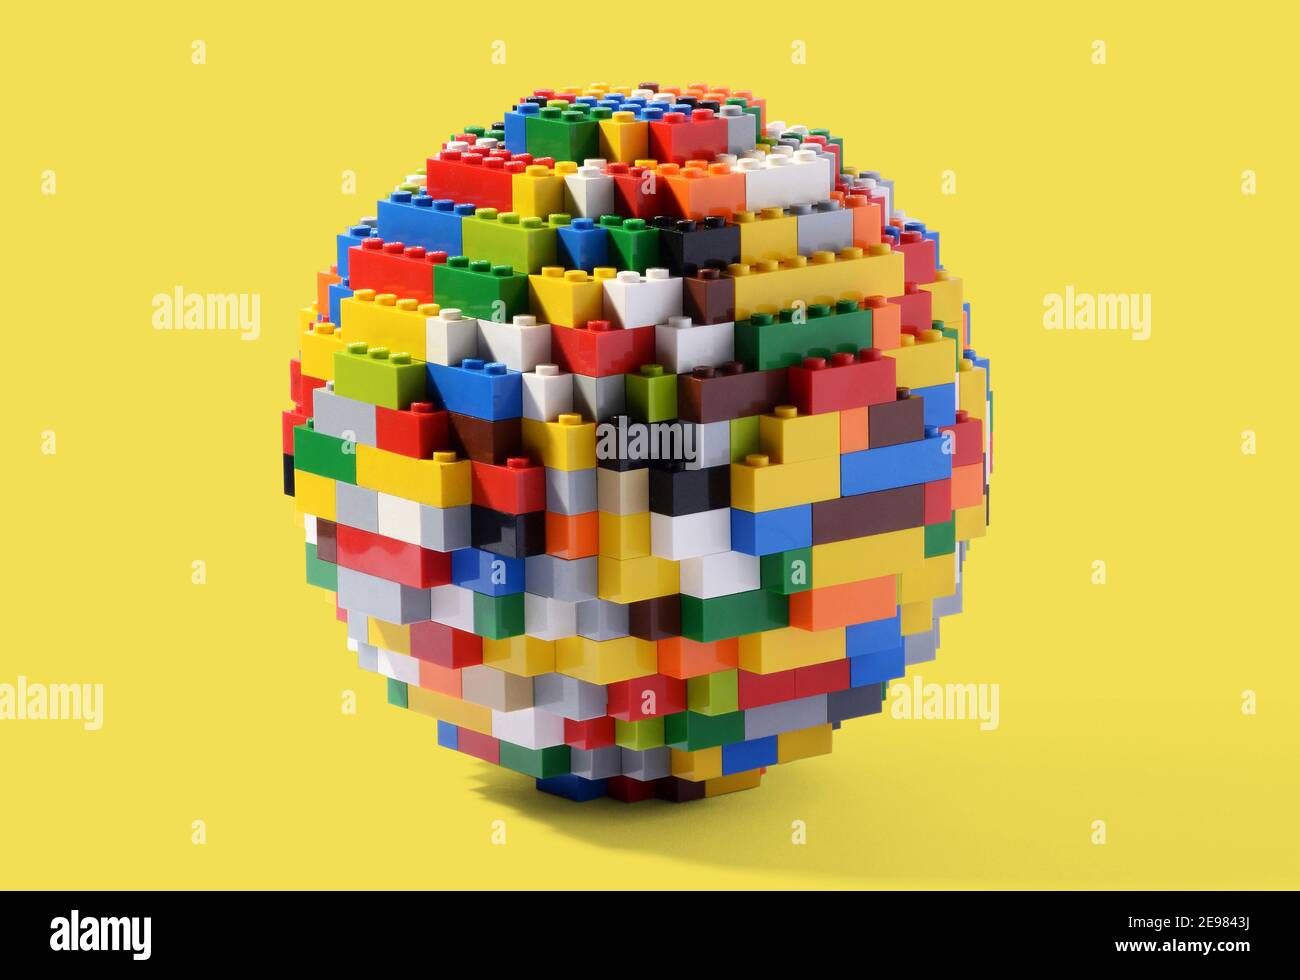 Circular globe or sphere constructed of multicolored interlocking Lego blocks, a well known childhood toy which can be assembled and disassembled mult Stock Photo